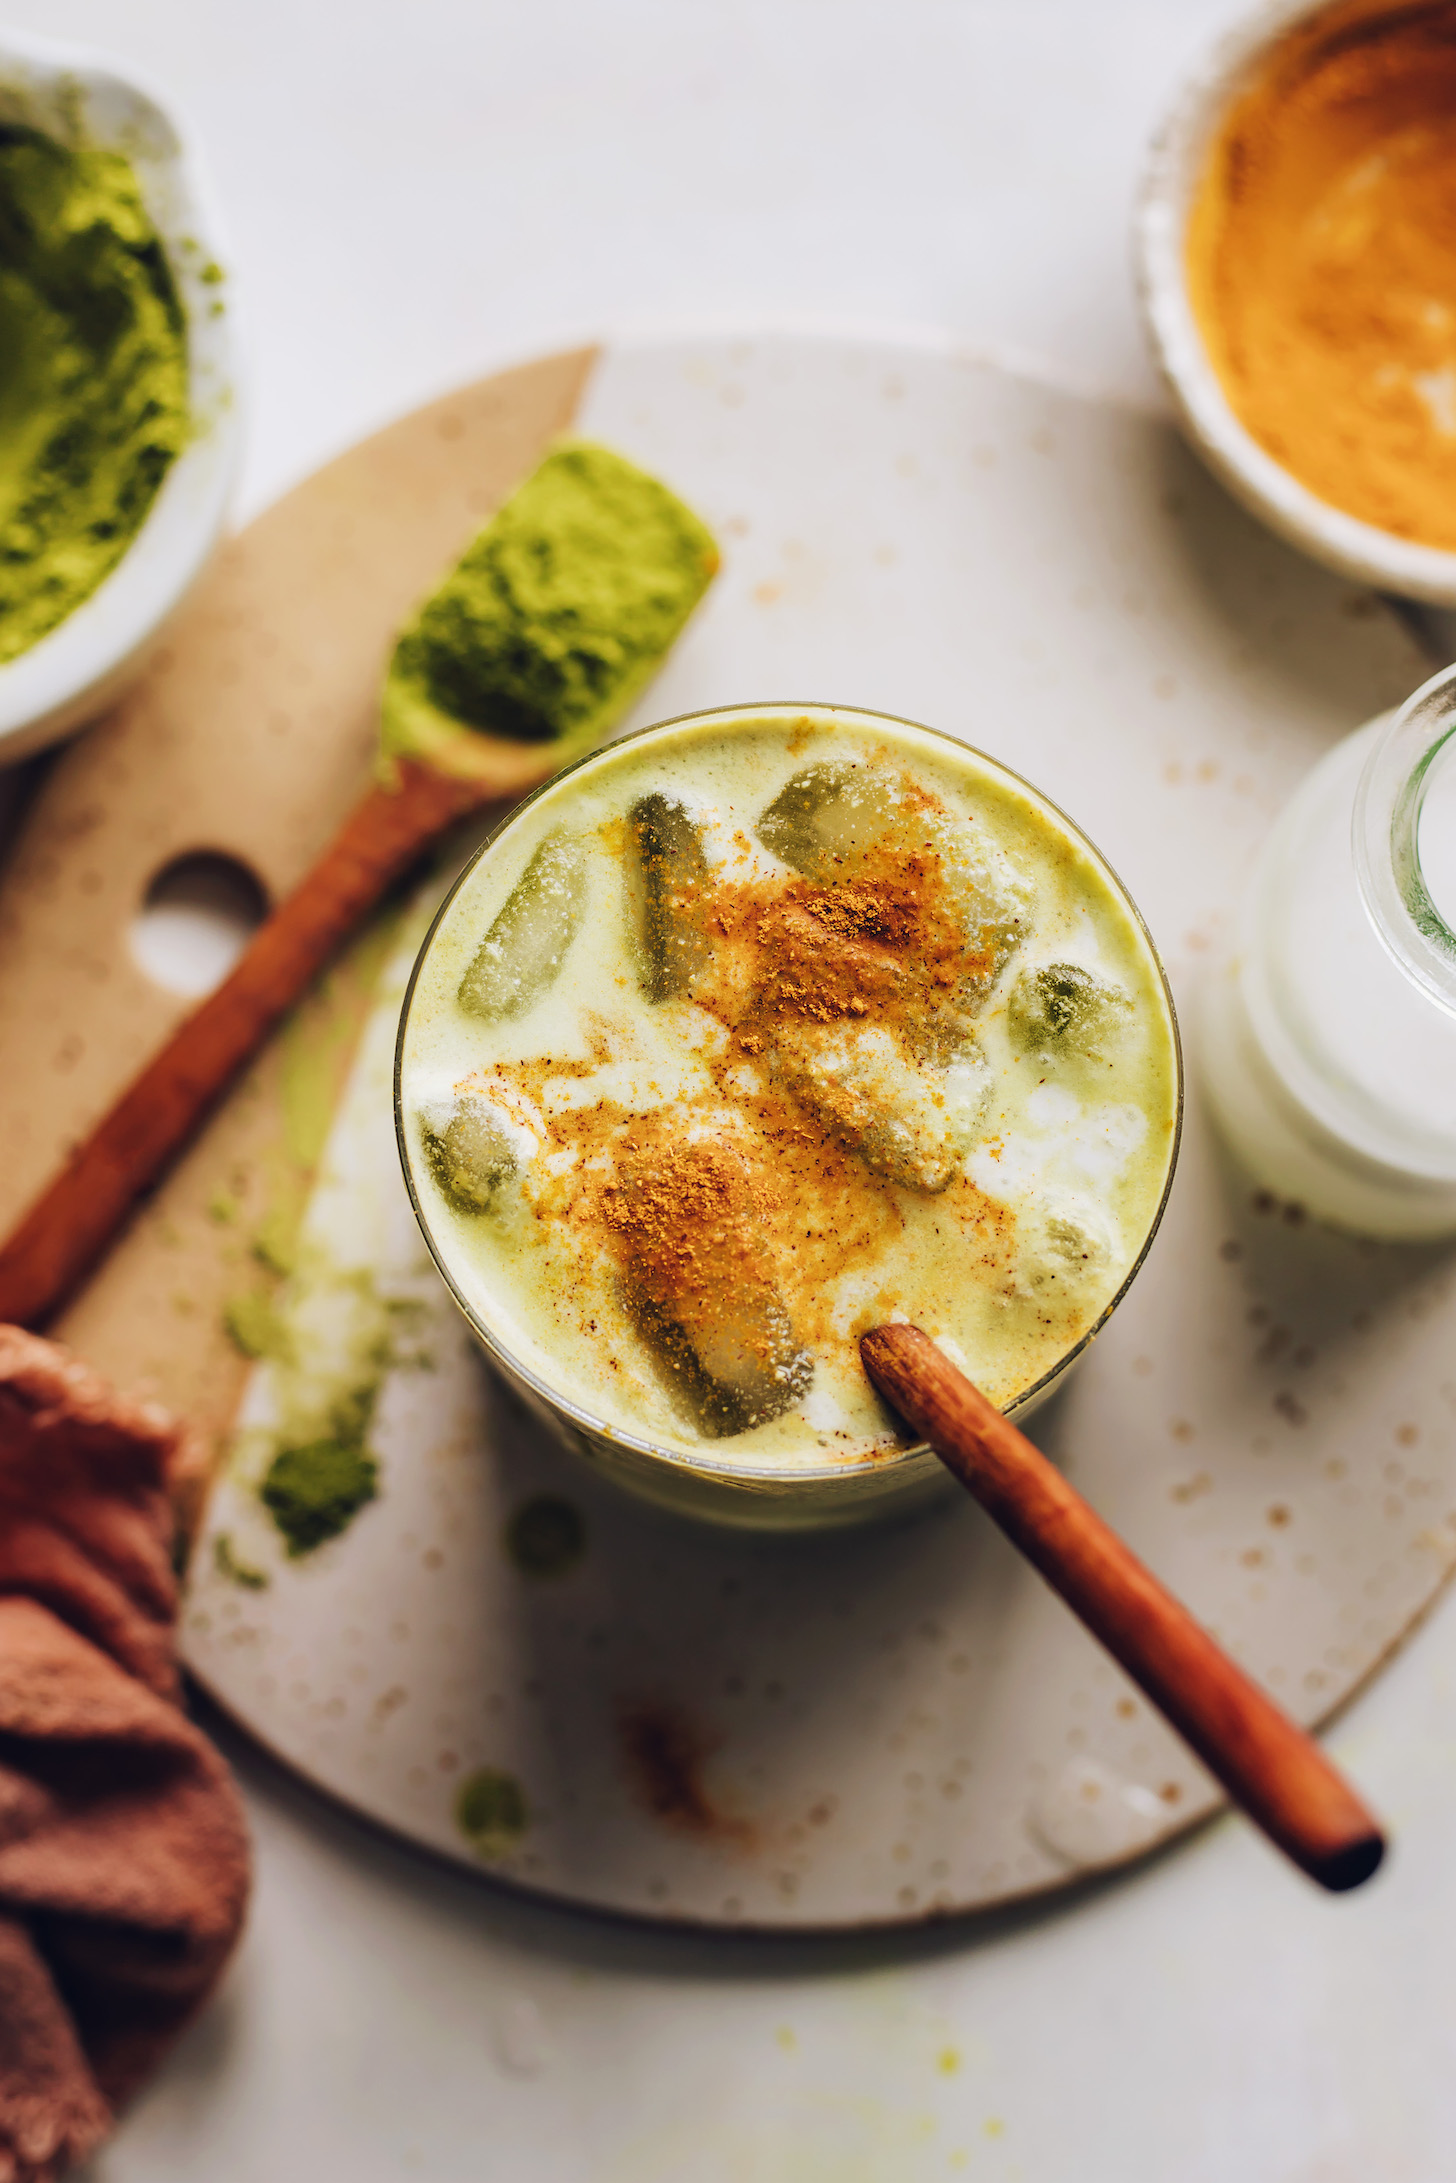 Spices sprinkled on a glass of iced golden matcha latte